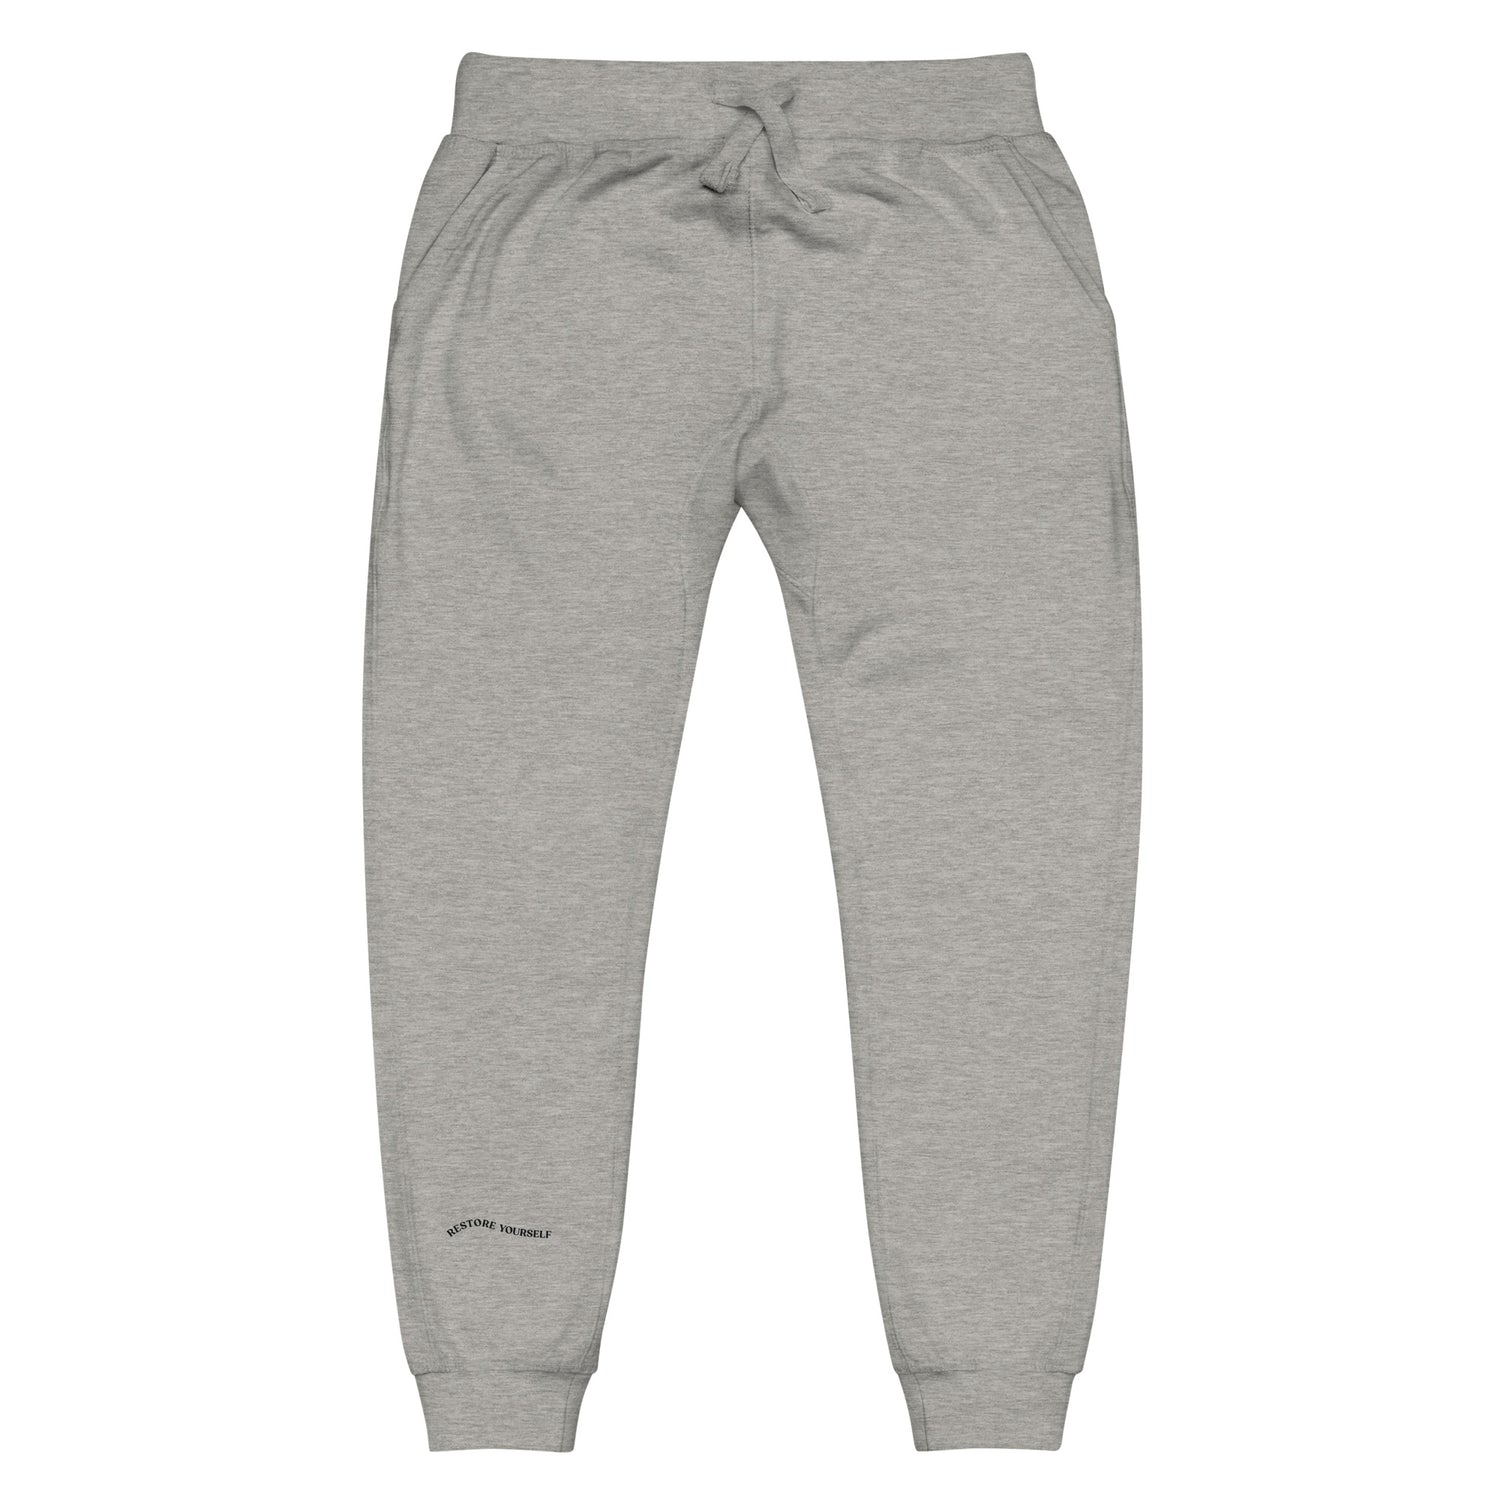 Grey sweat pant helps mental health with "Restore Yourself".